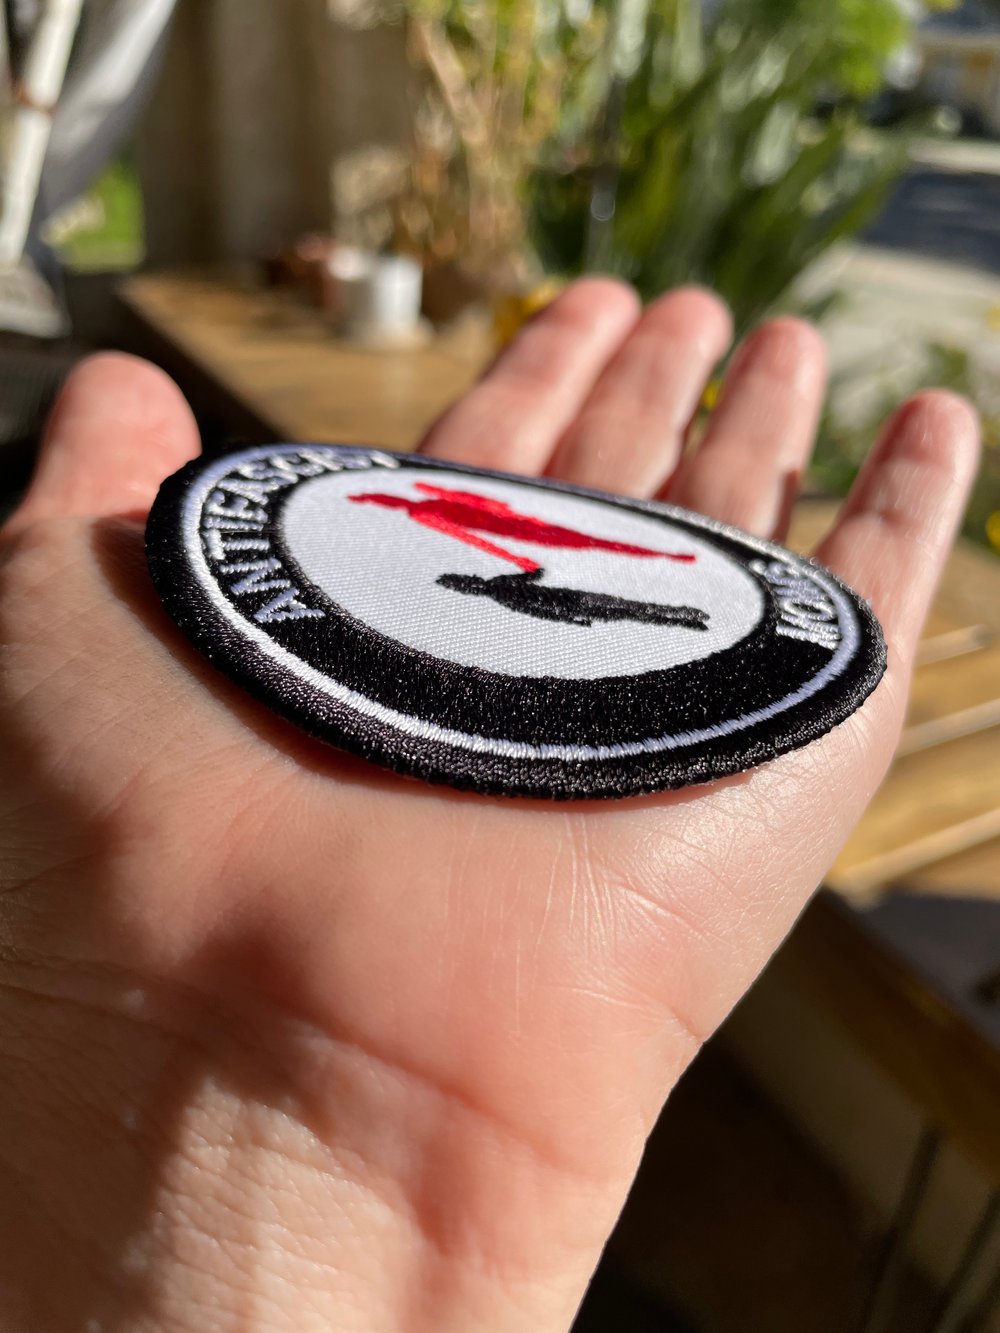 Image of Antifascist Moms Embroidered patch